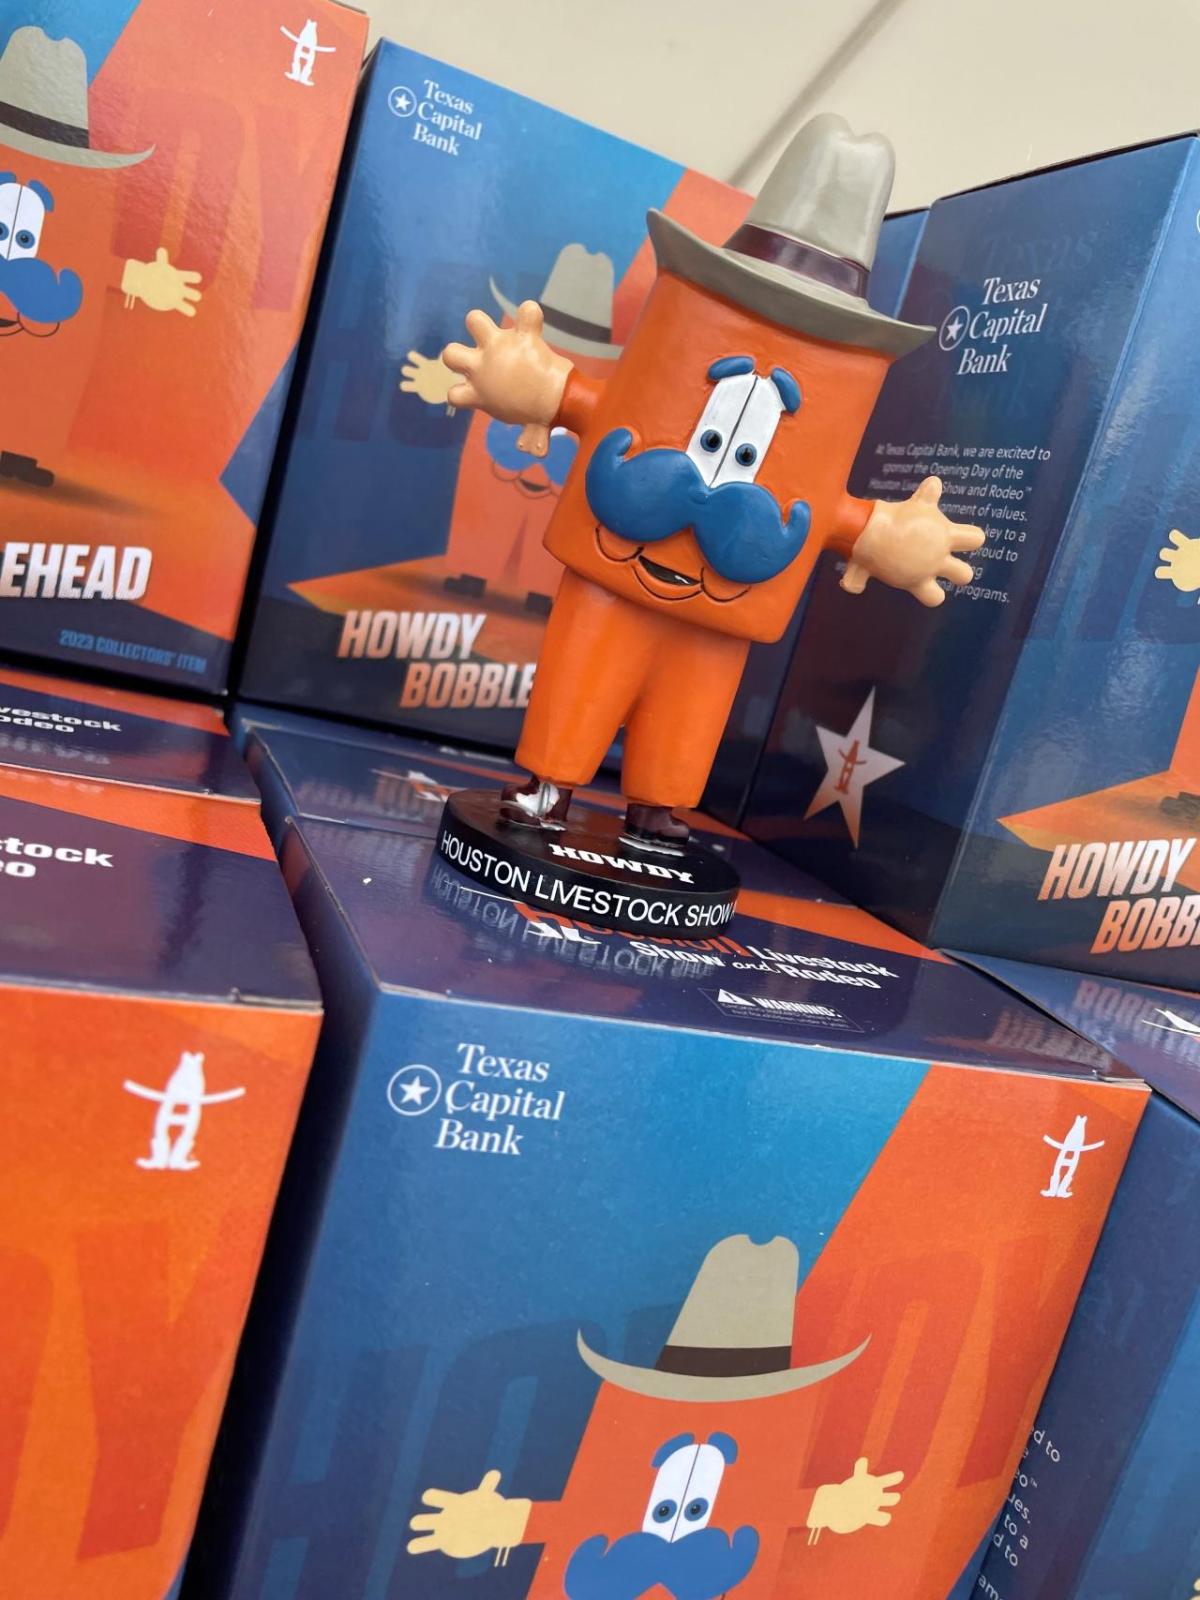 "Howdy Bobblehead" boxes, one out on display